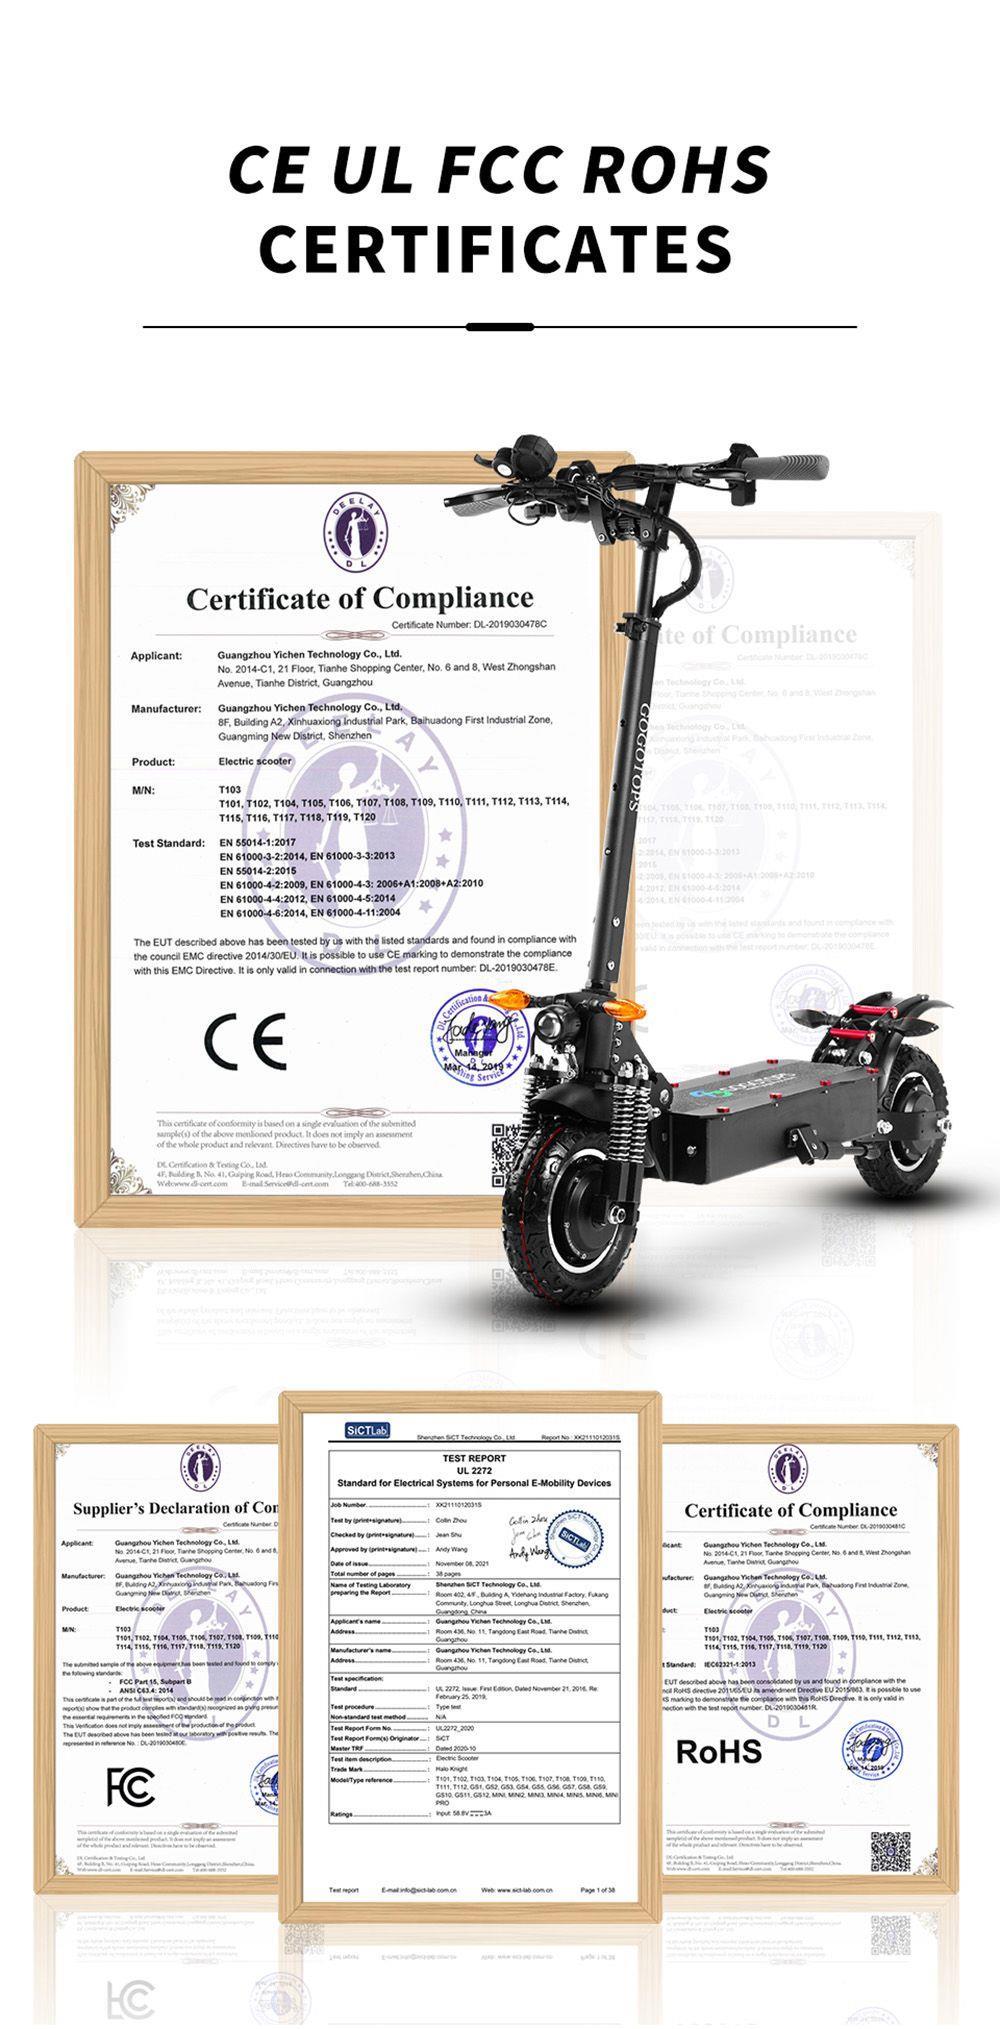 Gogotops GS4 Off Road Electric Scooter 2000W 28Ah Battery 60km Range 65km/h Max Speed 150kg Load